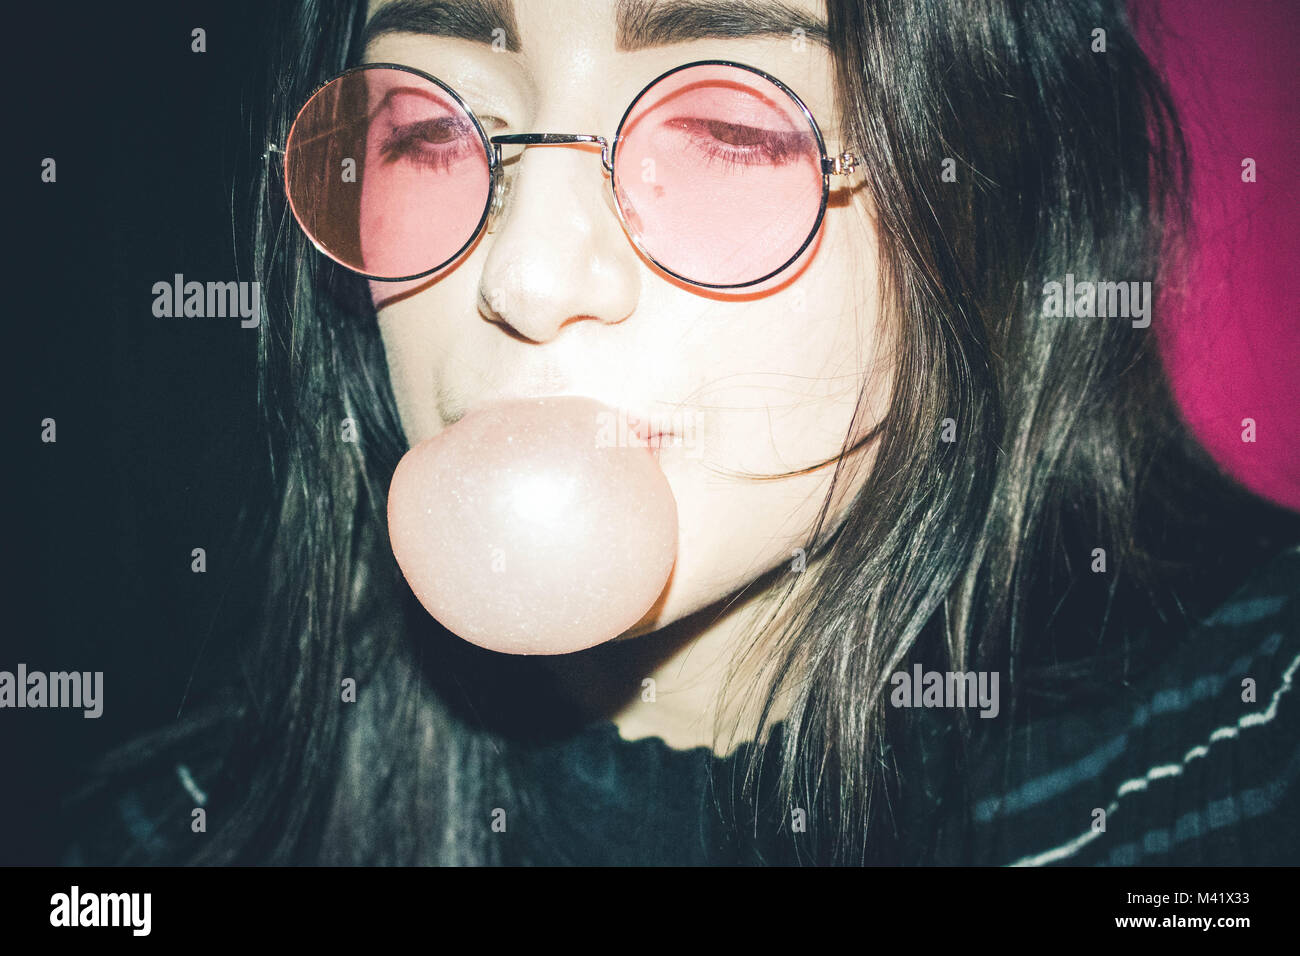 Girl in pink sunglasses blowing a bubble Stock Photo